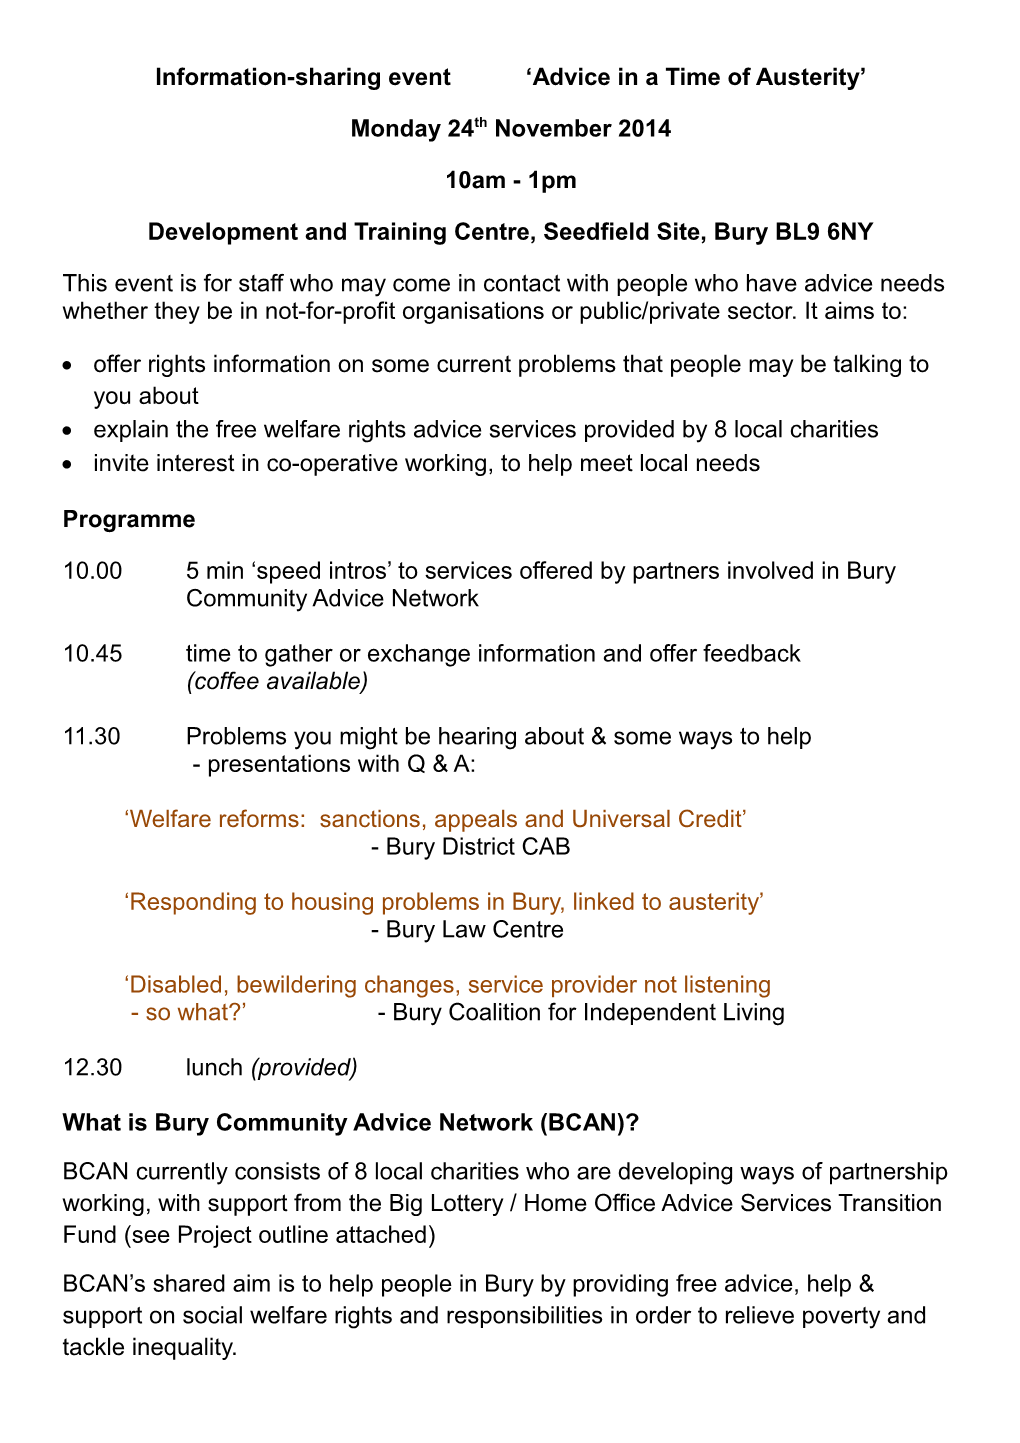 Information-Sharing Event Advice in a Time of Austerity